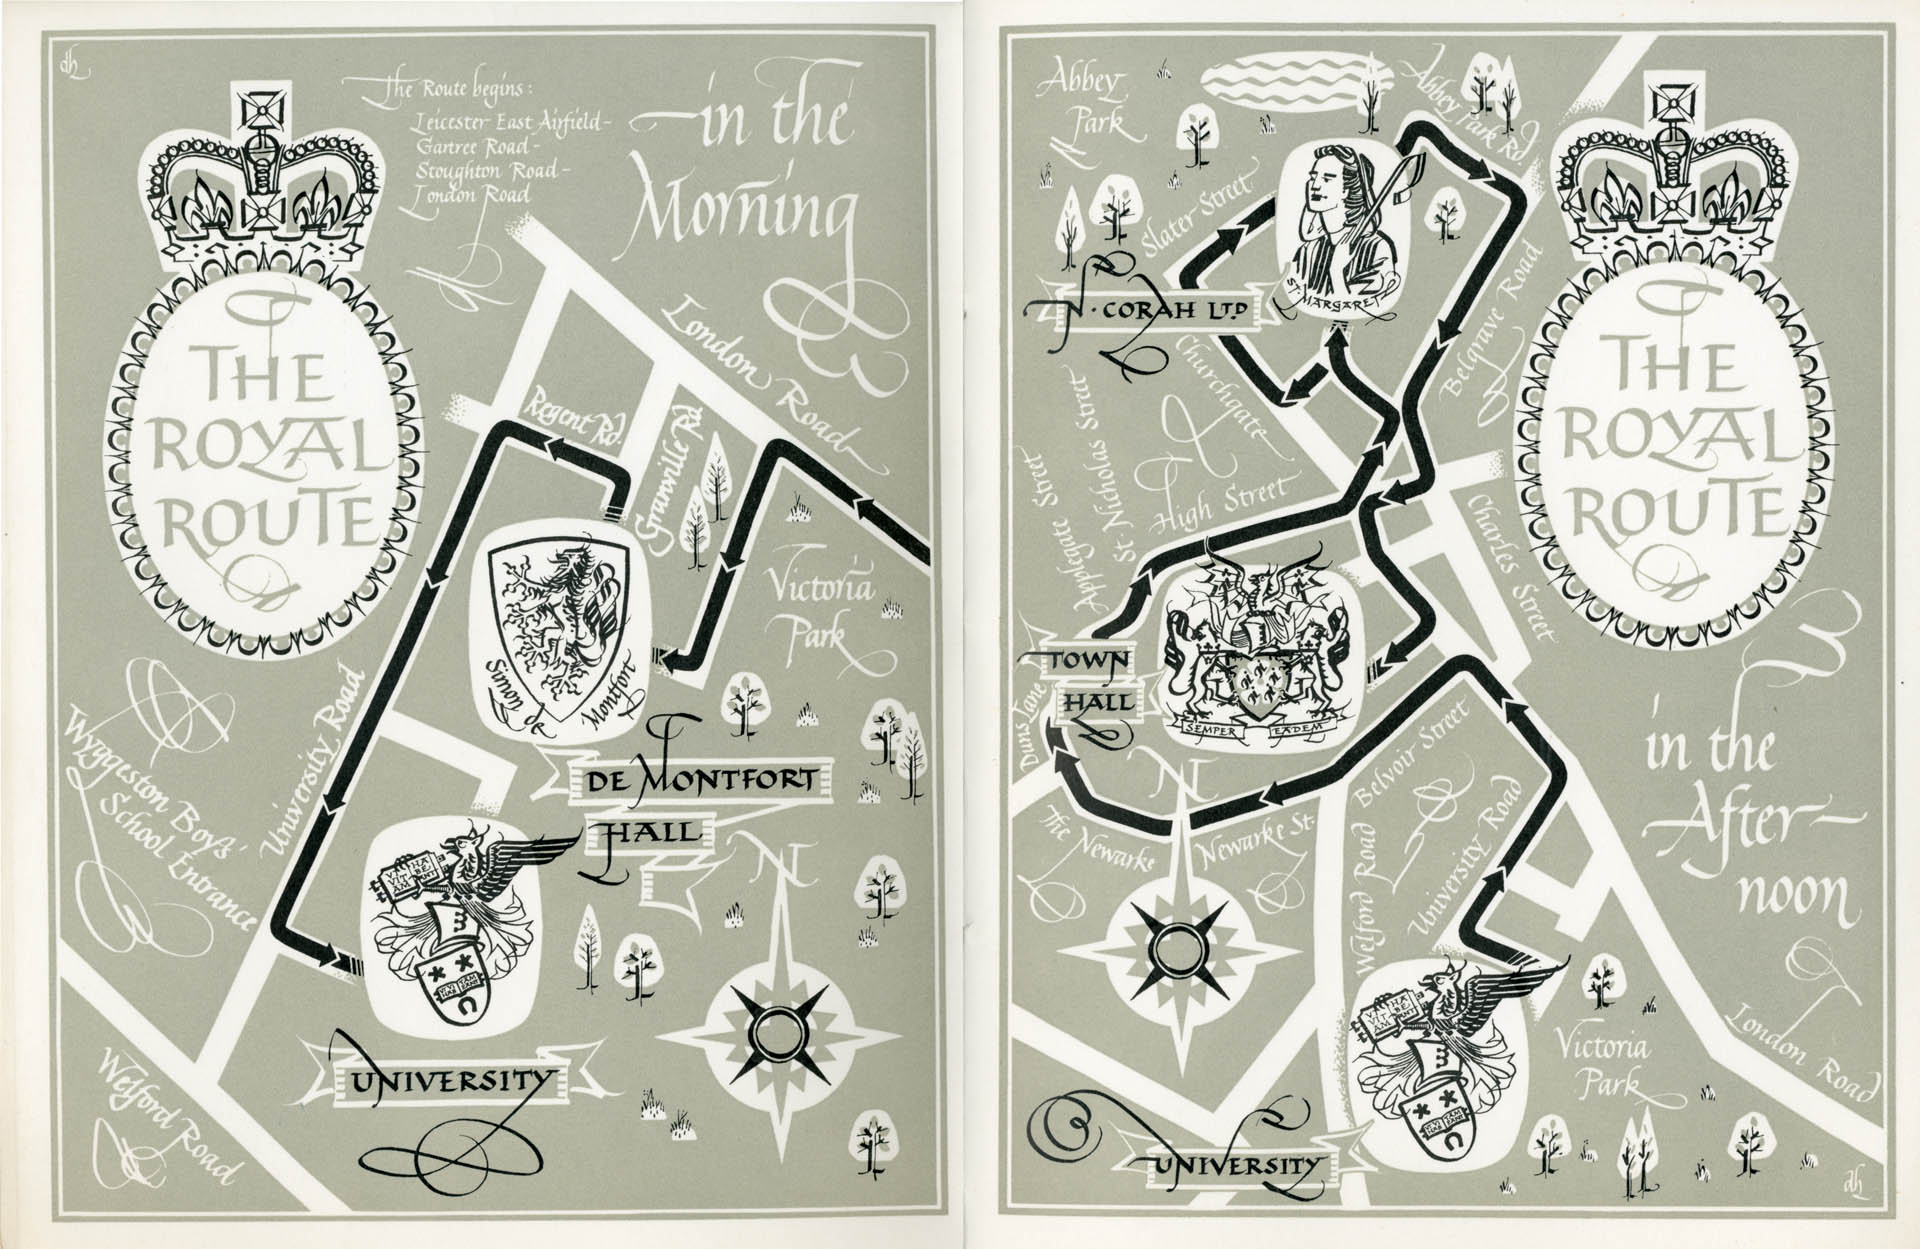 A souvenir map showing the ‘Royal Route’ around Leicester, 1958 -